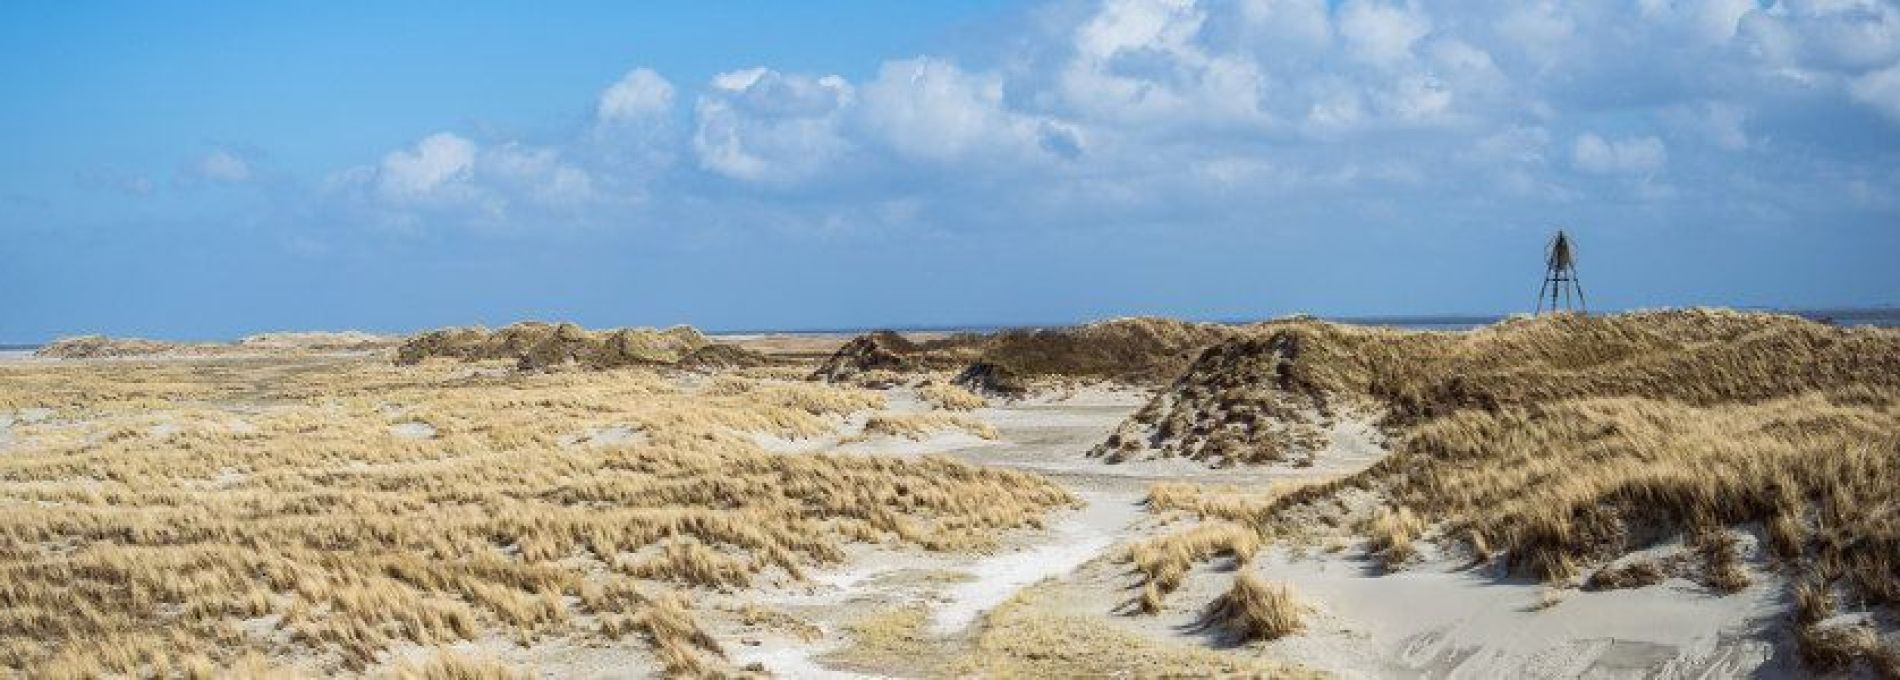 Frequently asked questions about cancellation - Tourist Information Centre VVV Ameland.